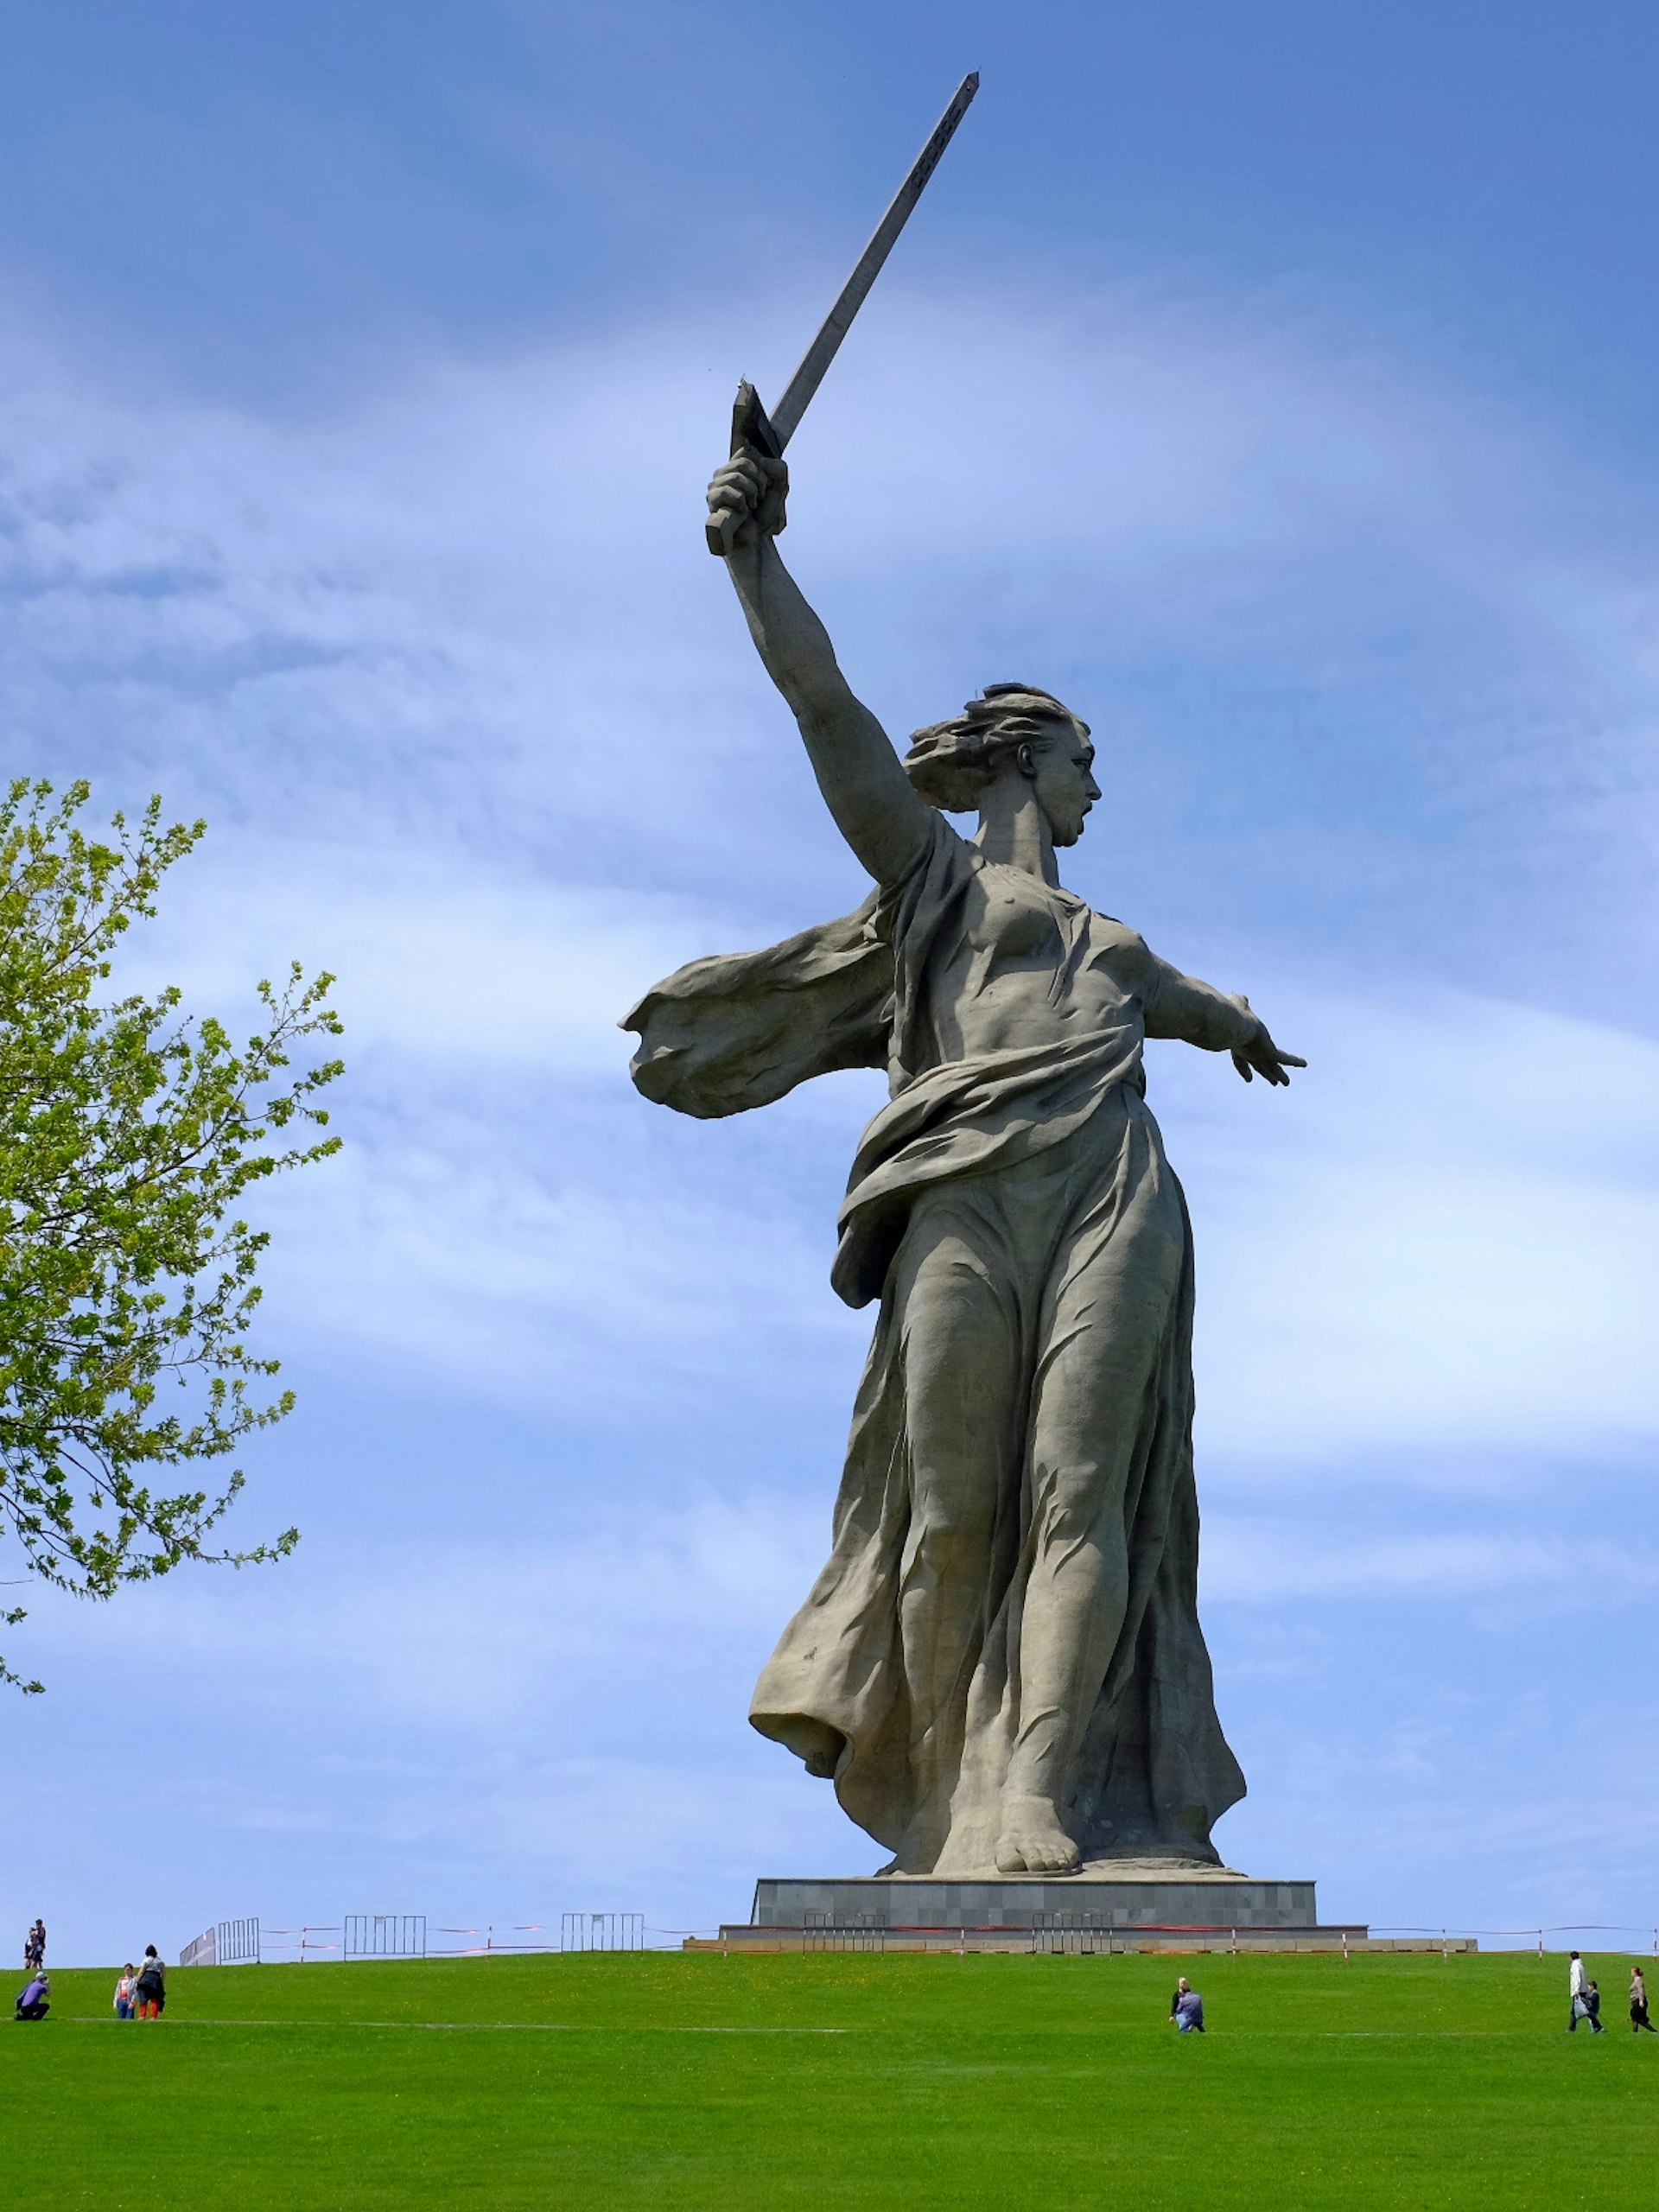 The immense Mother Russia statue at Mamaev Kurgan in Volgograd © Mark Baker / Lonely Planet